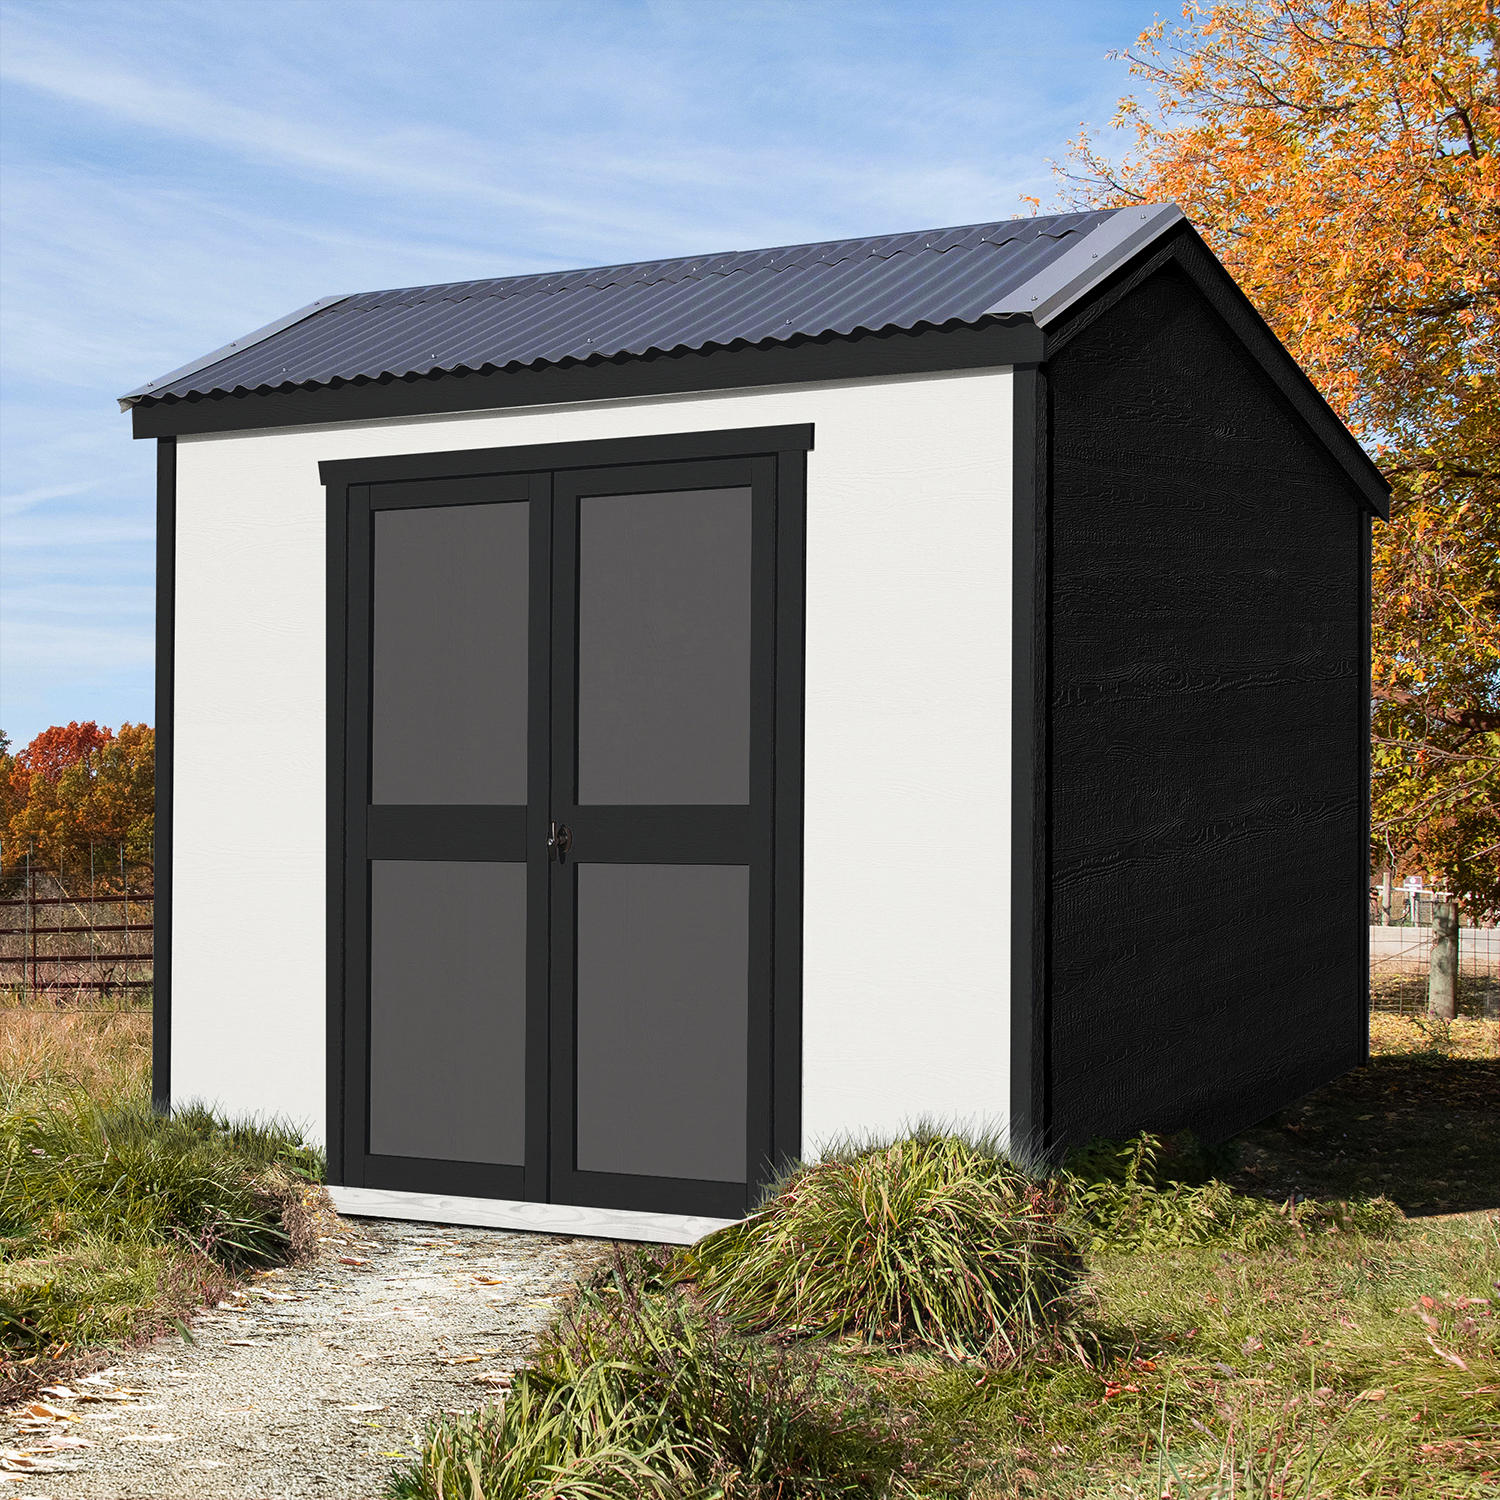 Gardena 8' x 6' Outdoor Wood Shed Assembled